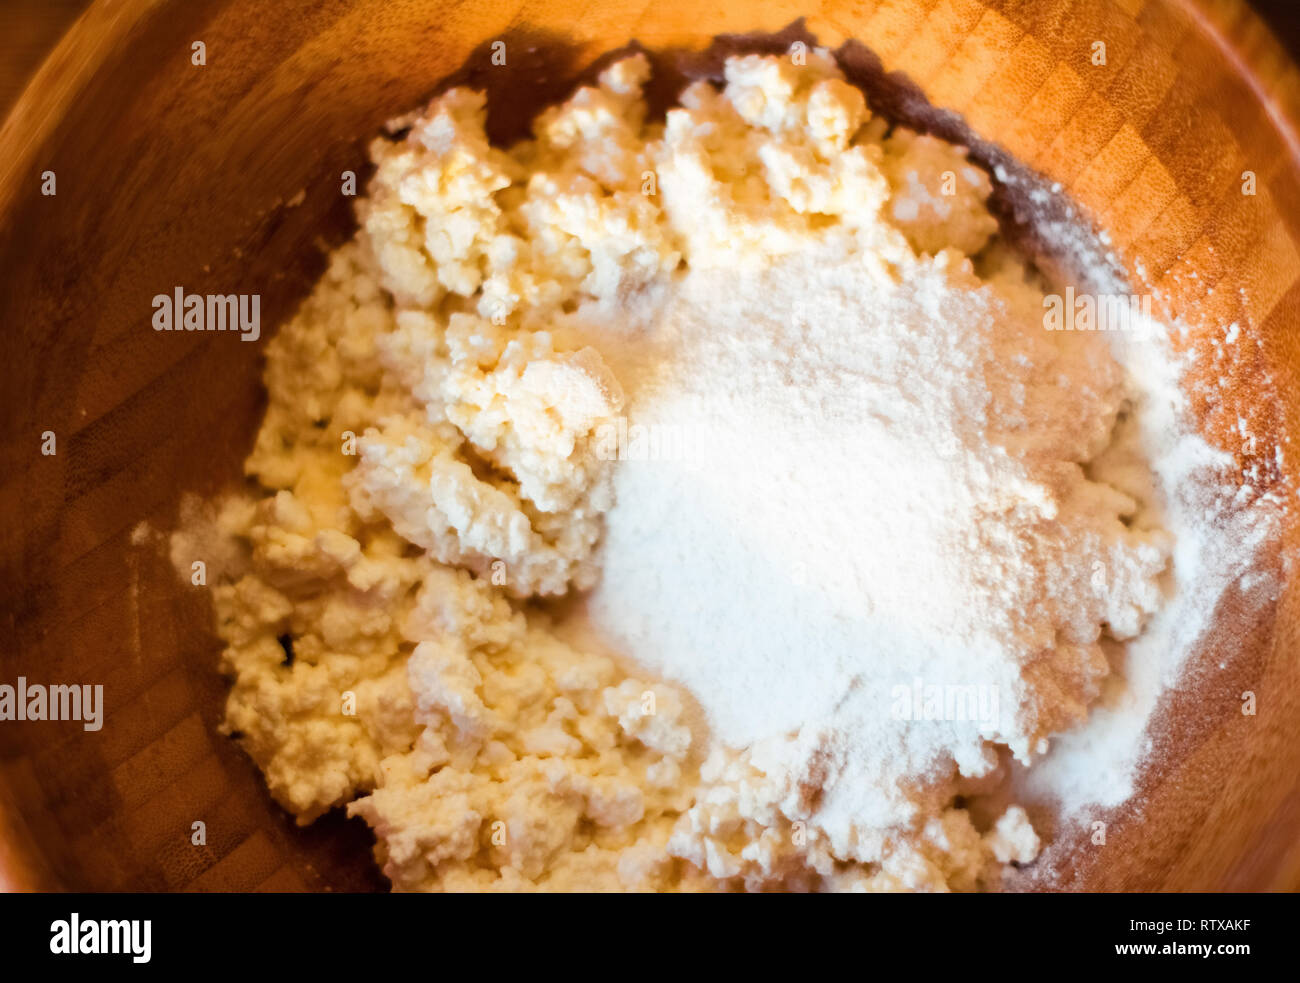 Flour Eggs And Cottage Cheese Rustic Cookbook Recipe Weekend